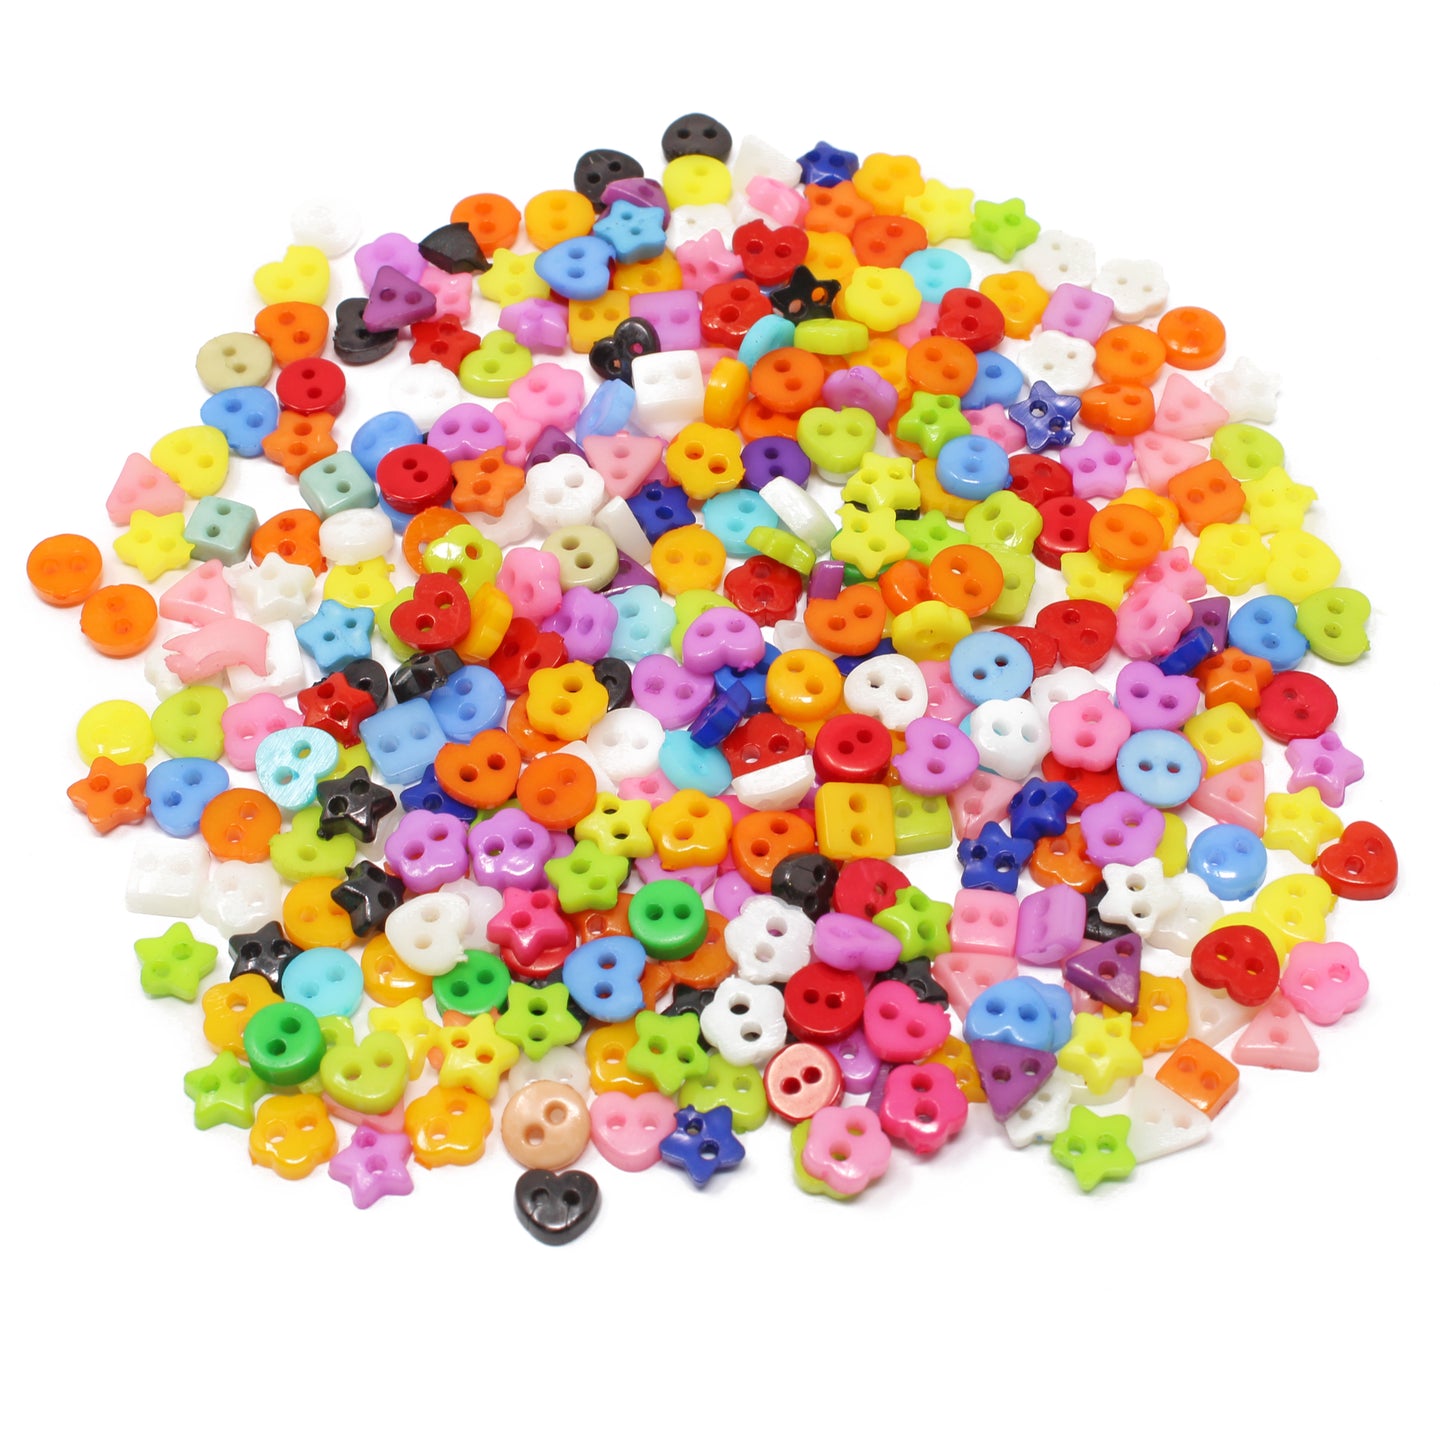 Mixed Shape 6mm Multicoloured Resin Buttons - Pack of 300